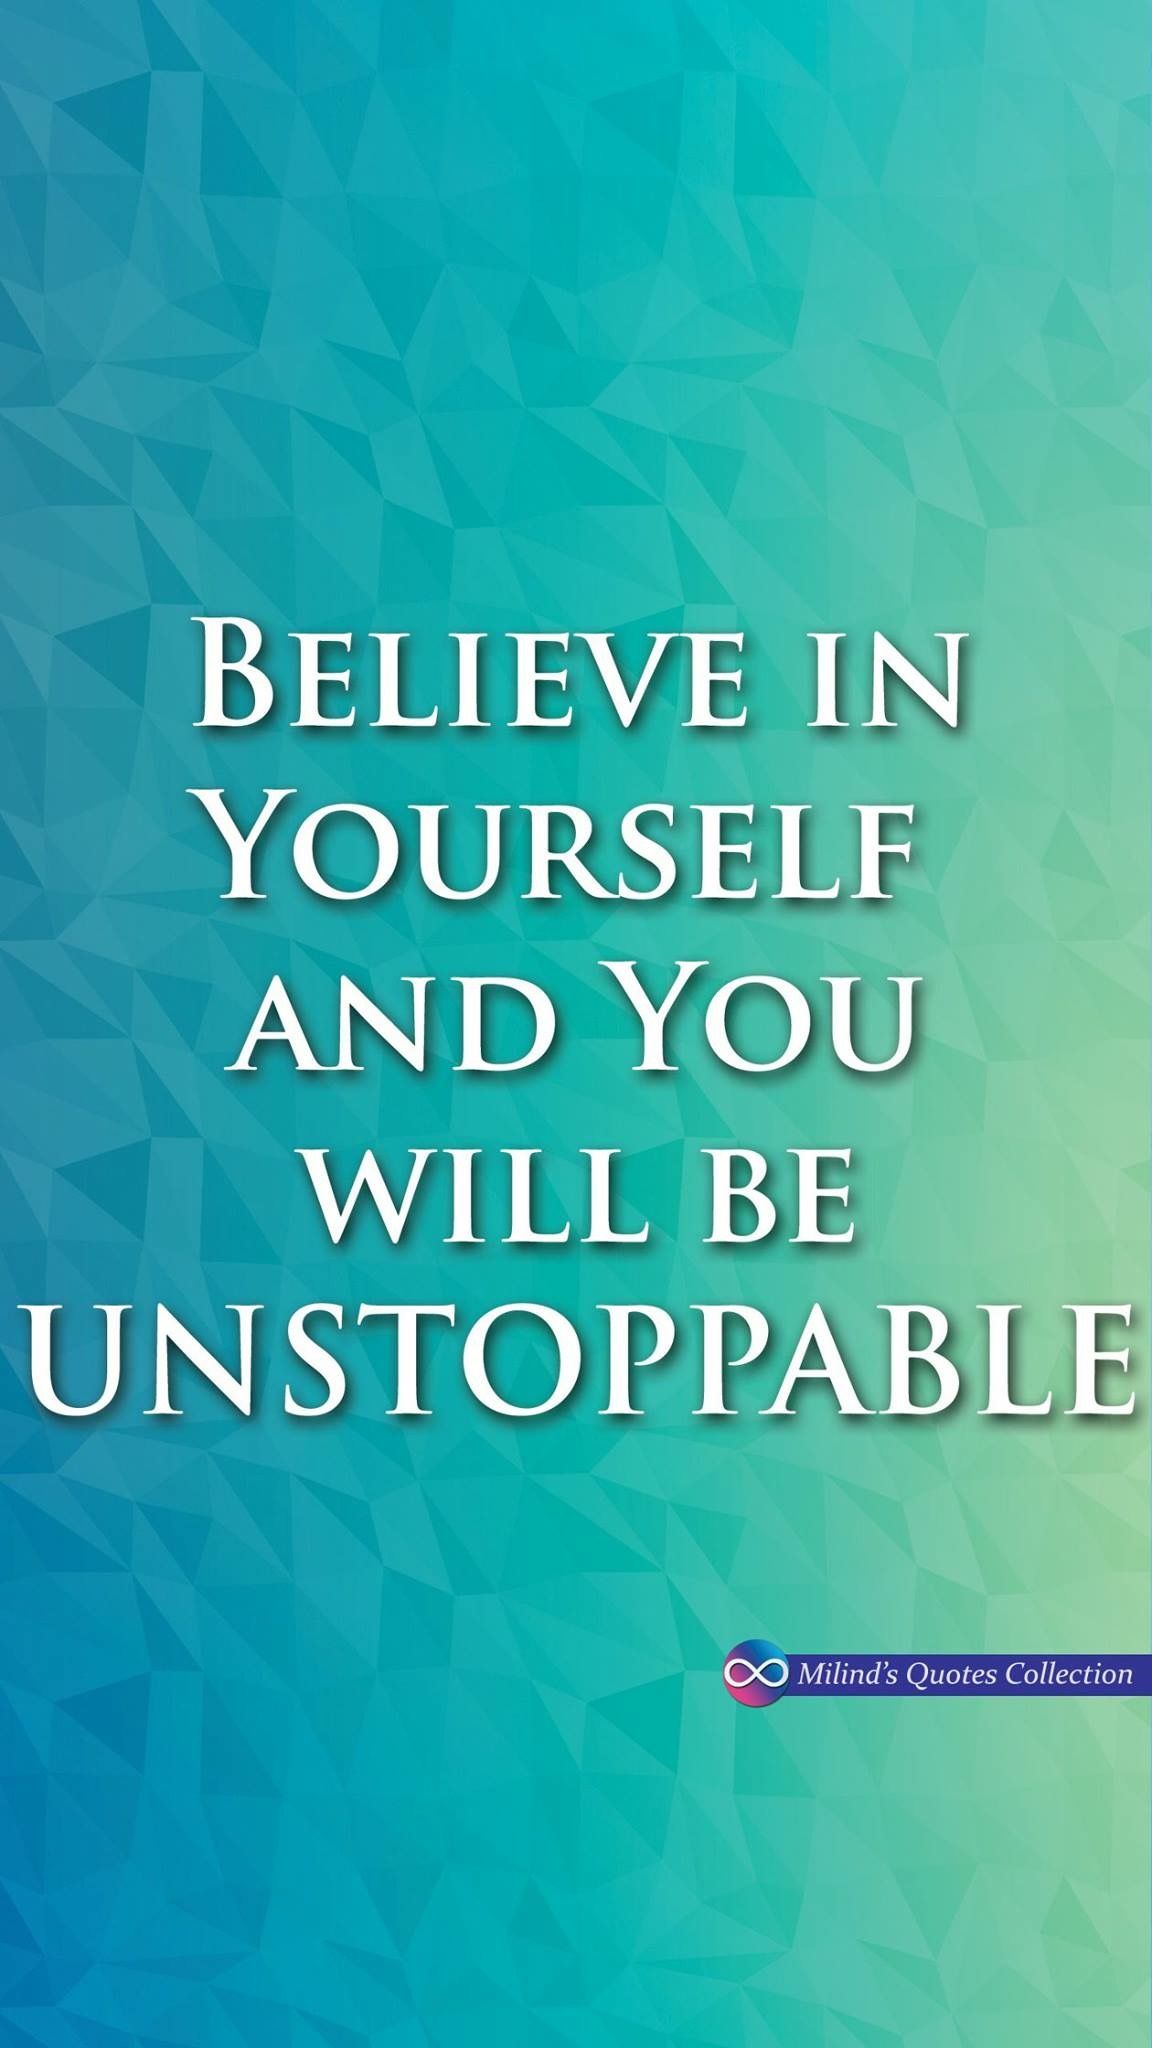 Believe in #Yourself and #You will be #UNSTOPPABLE